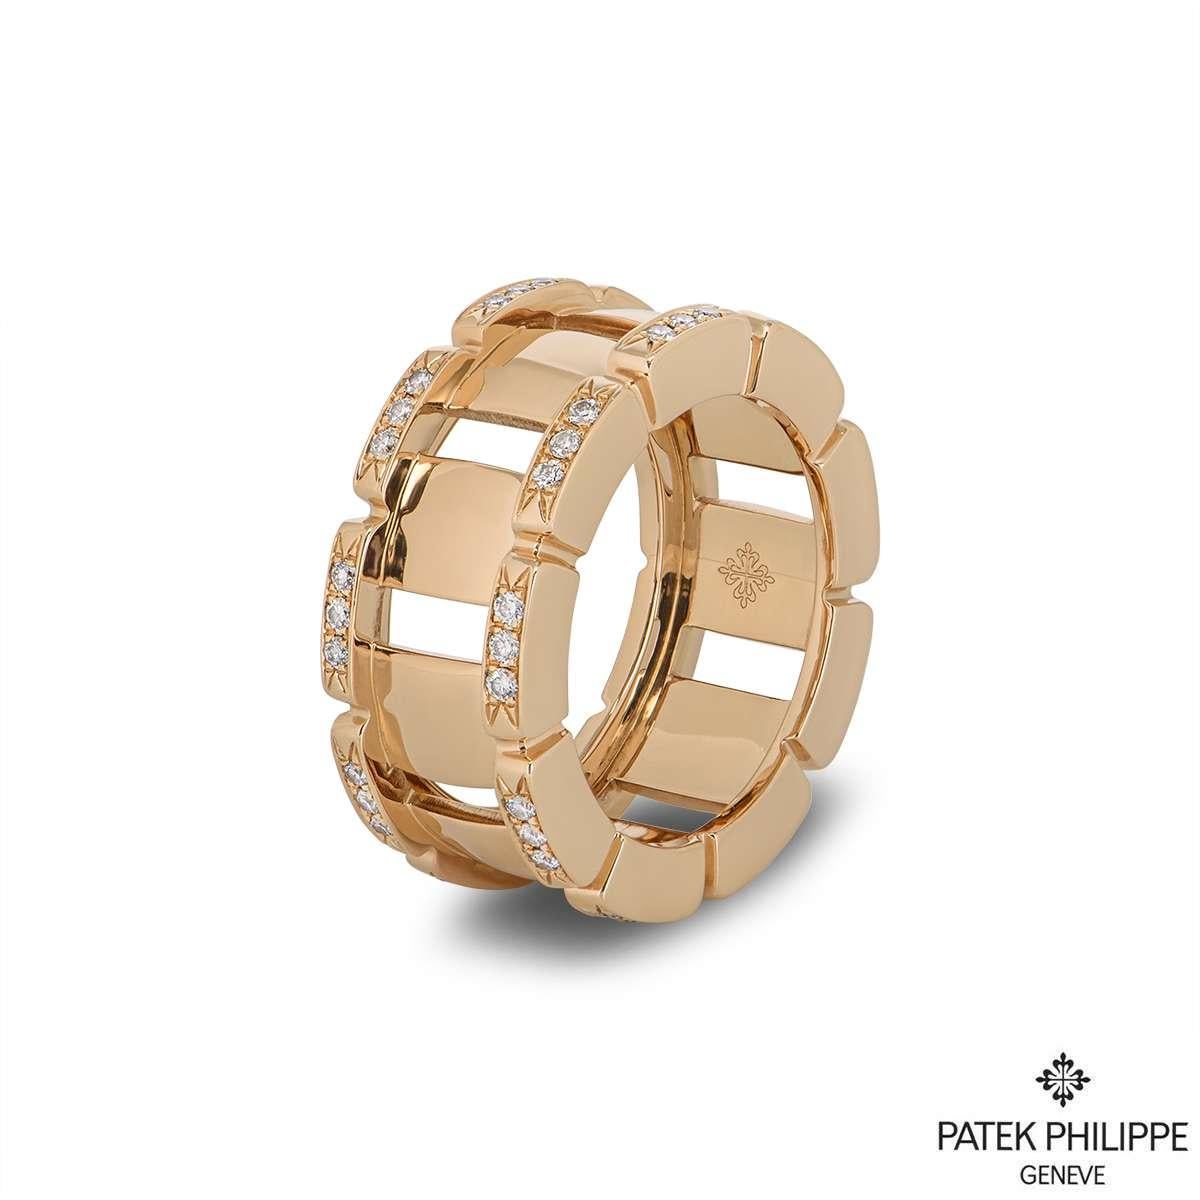 A stylish 18k rose gold ring from the Twenty-4 collection by Patek Philippe. The openwork ring is composed of 54 round brilliant cut diamonds set around the outer edges totalling 0.47ct. The ring measures 1cm in width, is a size UK P - EU 56 - US